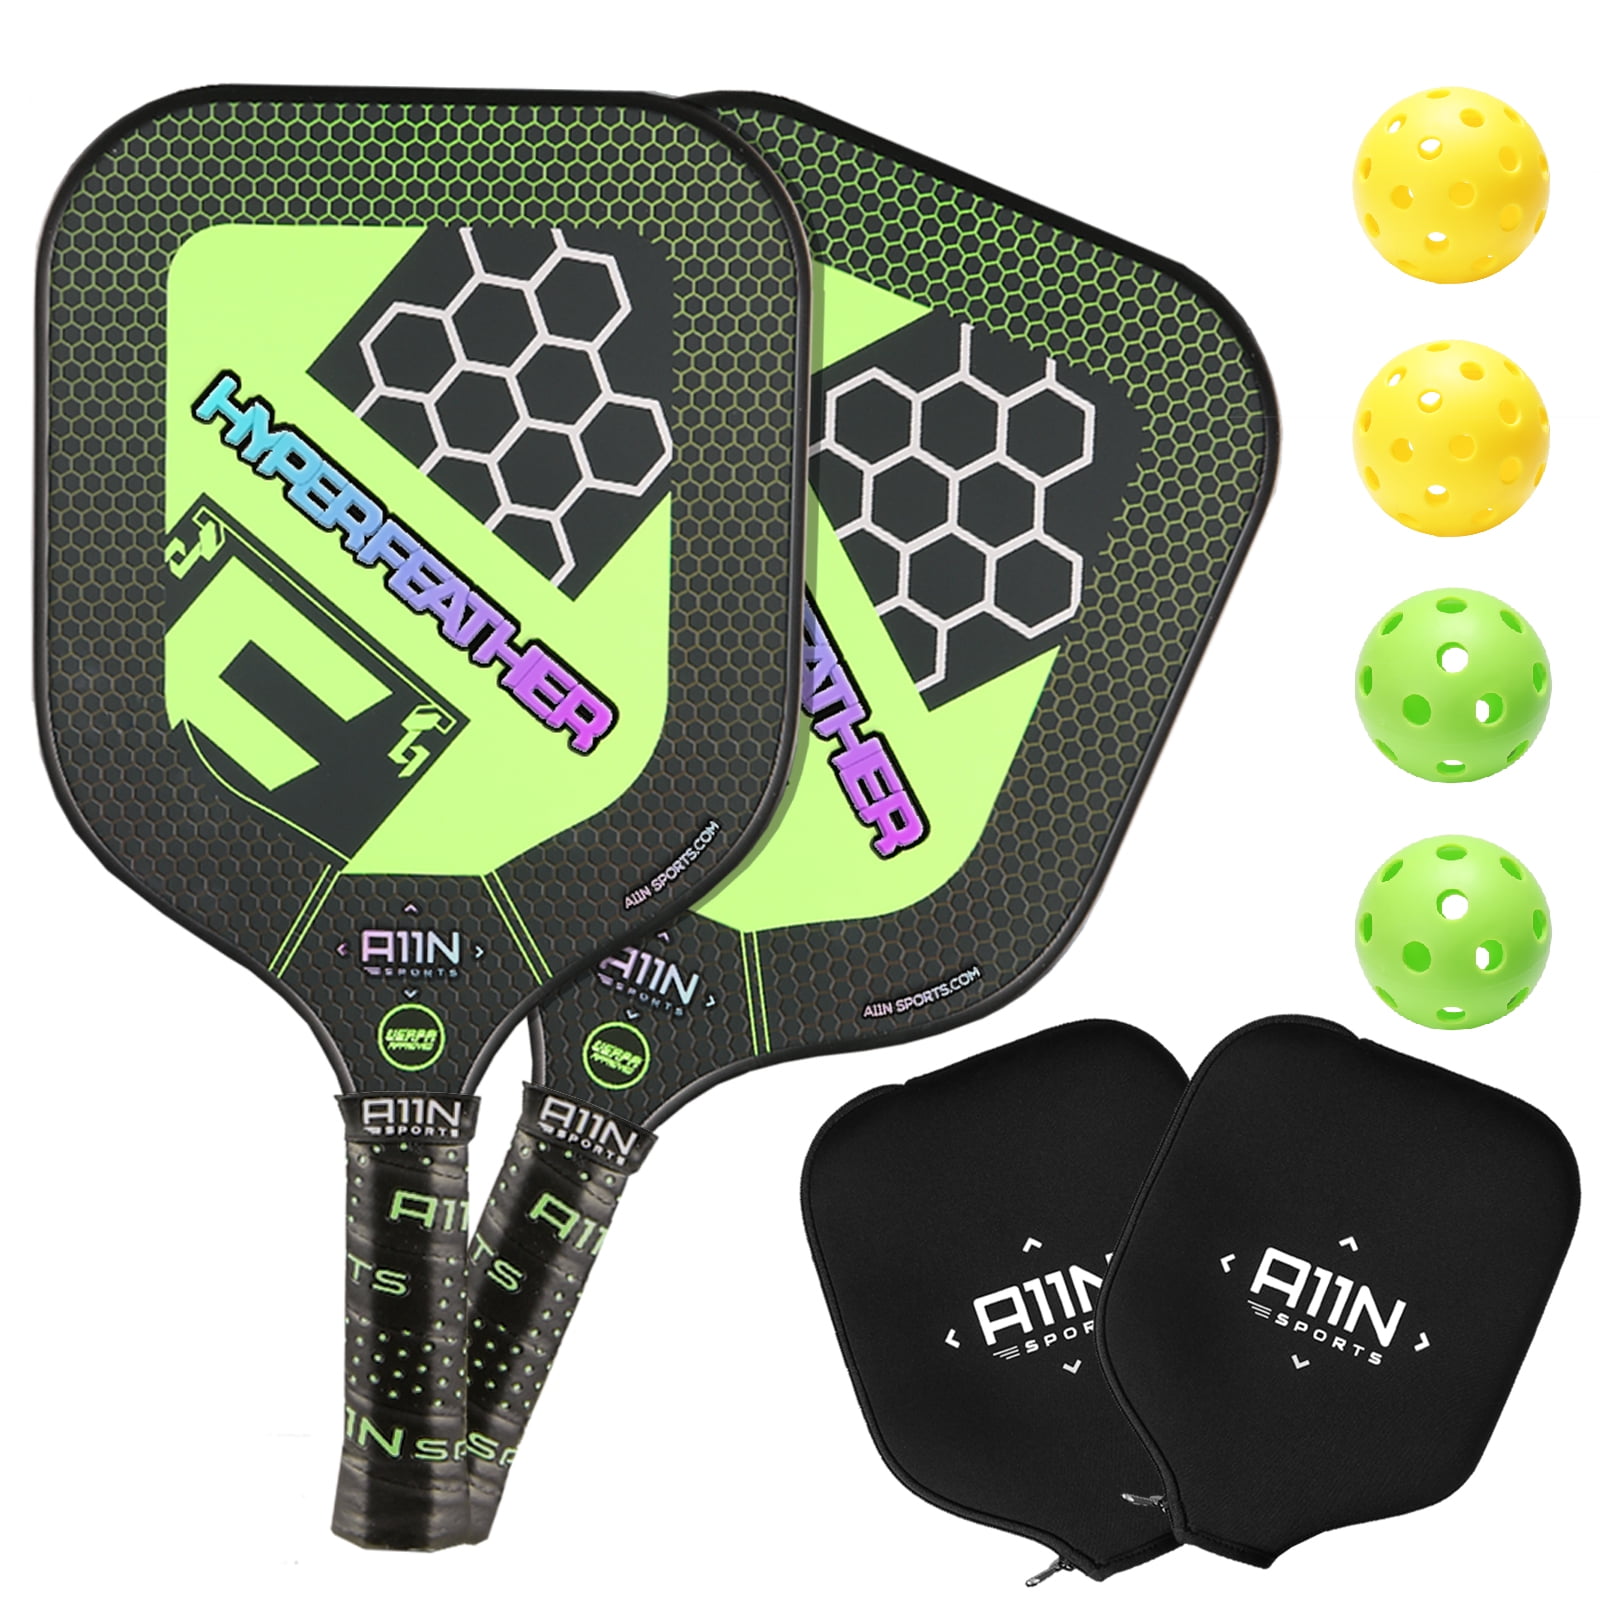 Durable Balls Overgrips Ultra Cushion Grip & Upgrade Racquet A11N SPORTS Covers A11N Premium Pickleball Paddle Set Graphite Face and Honeycombed Polymer Core Paddles Drawstring Bag 